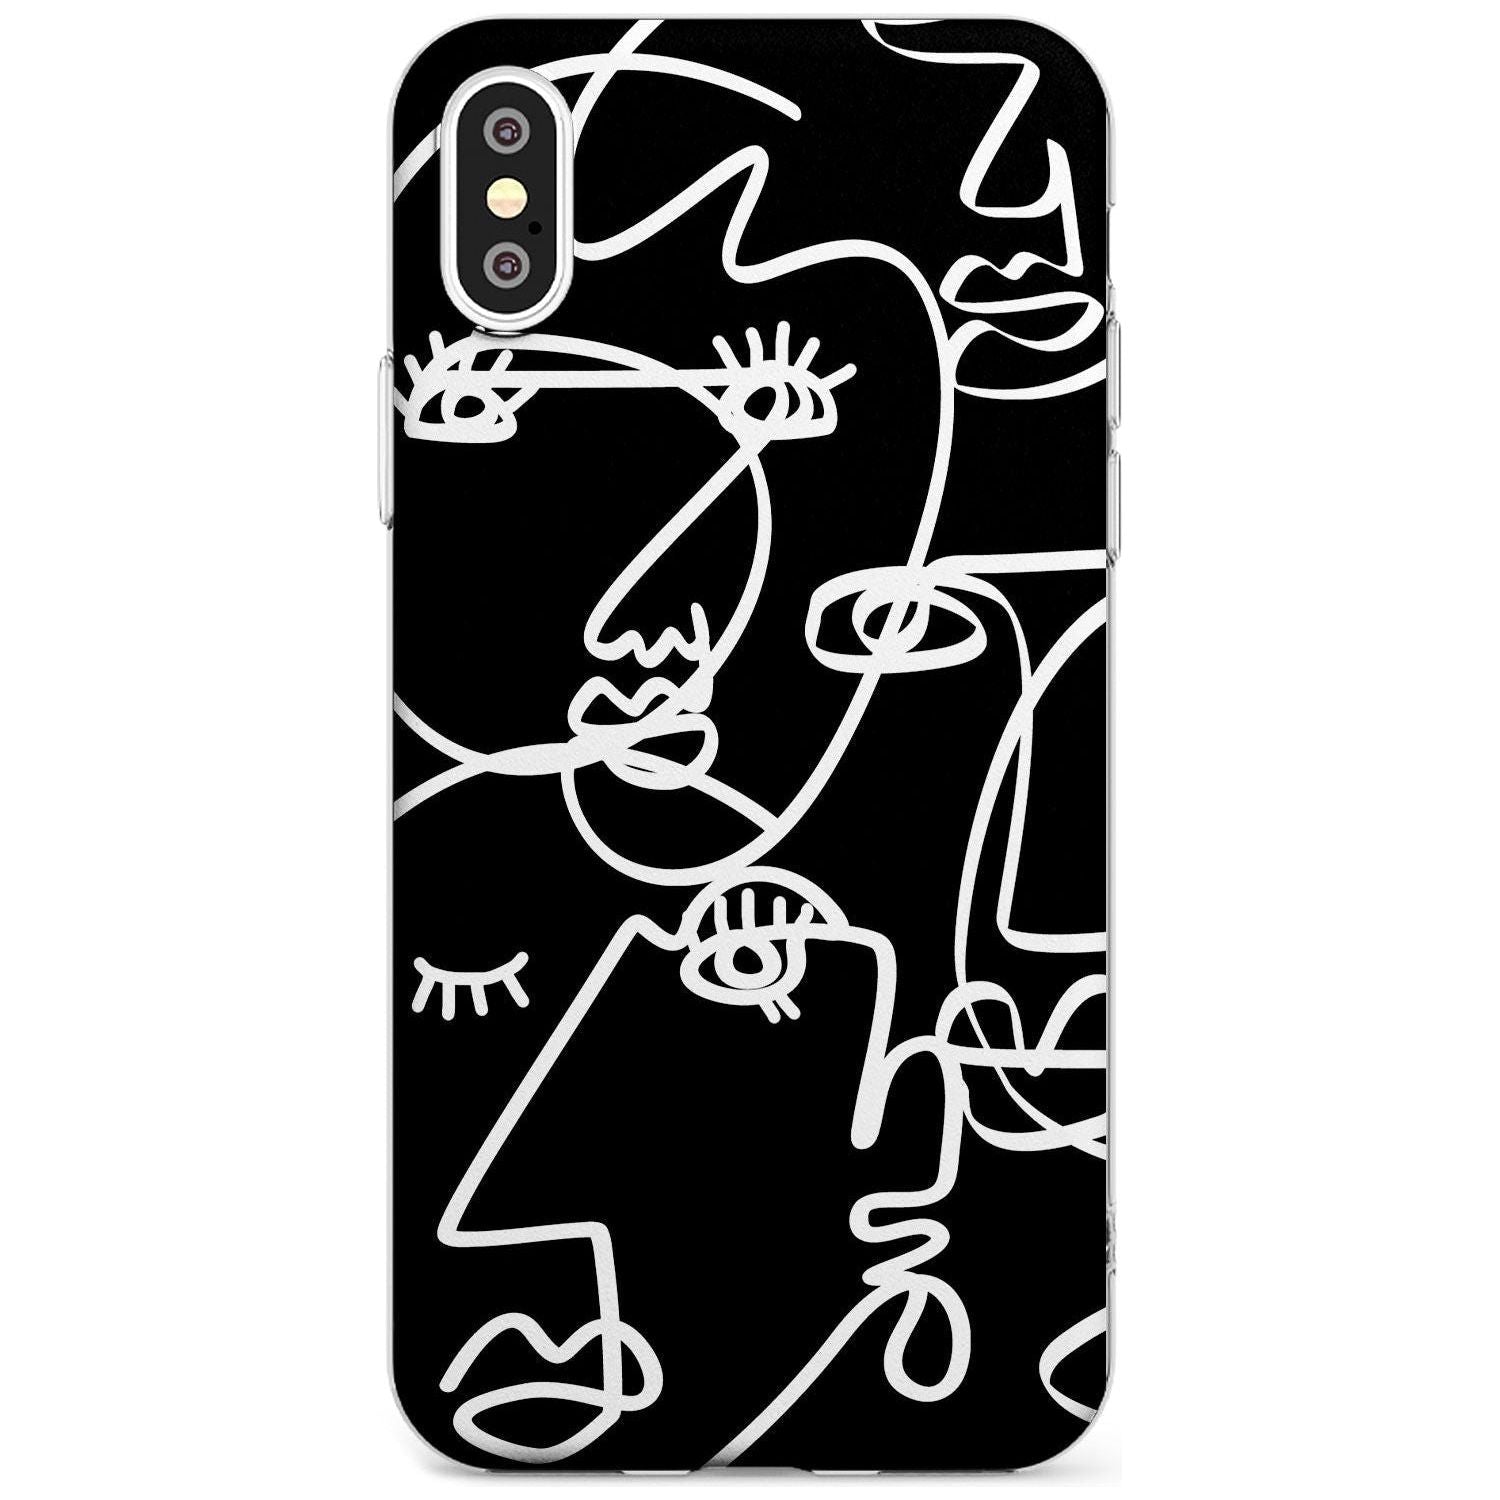 Continuous Line Faces: White on Black Black Impact Phone Case for iPhone X XS Max XR